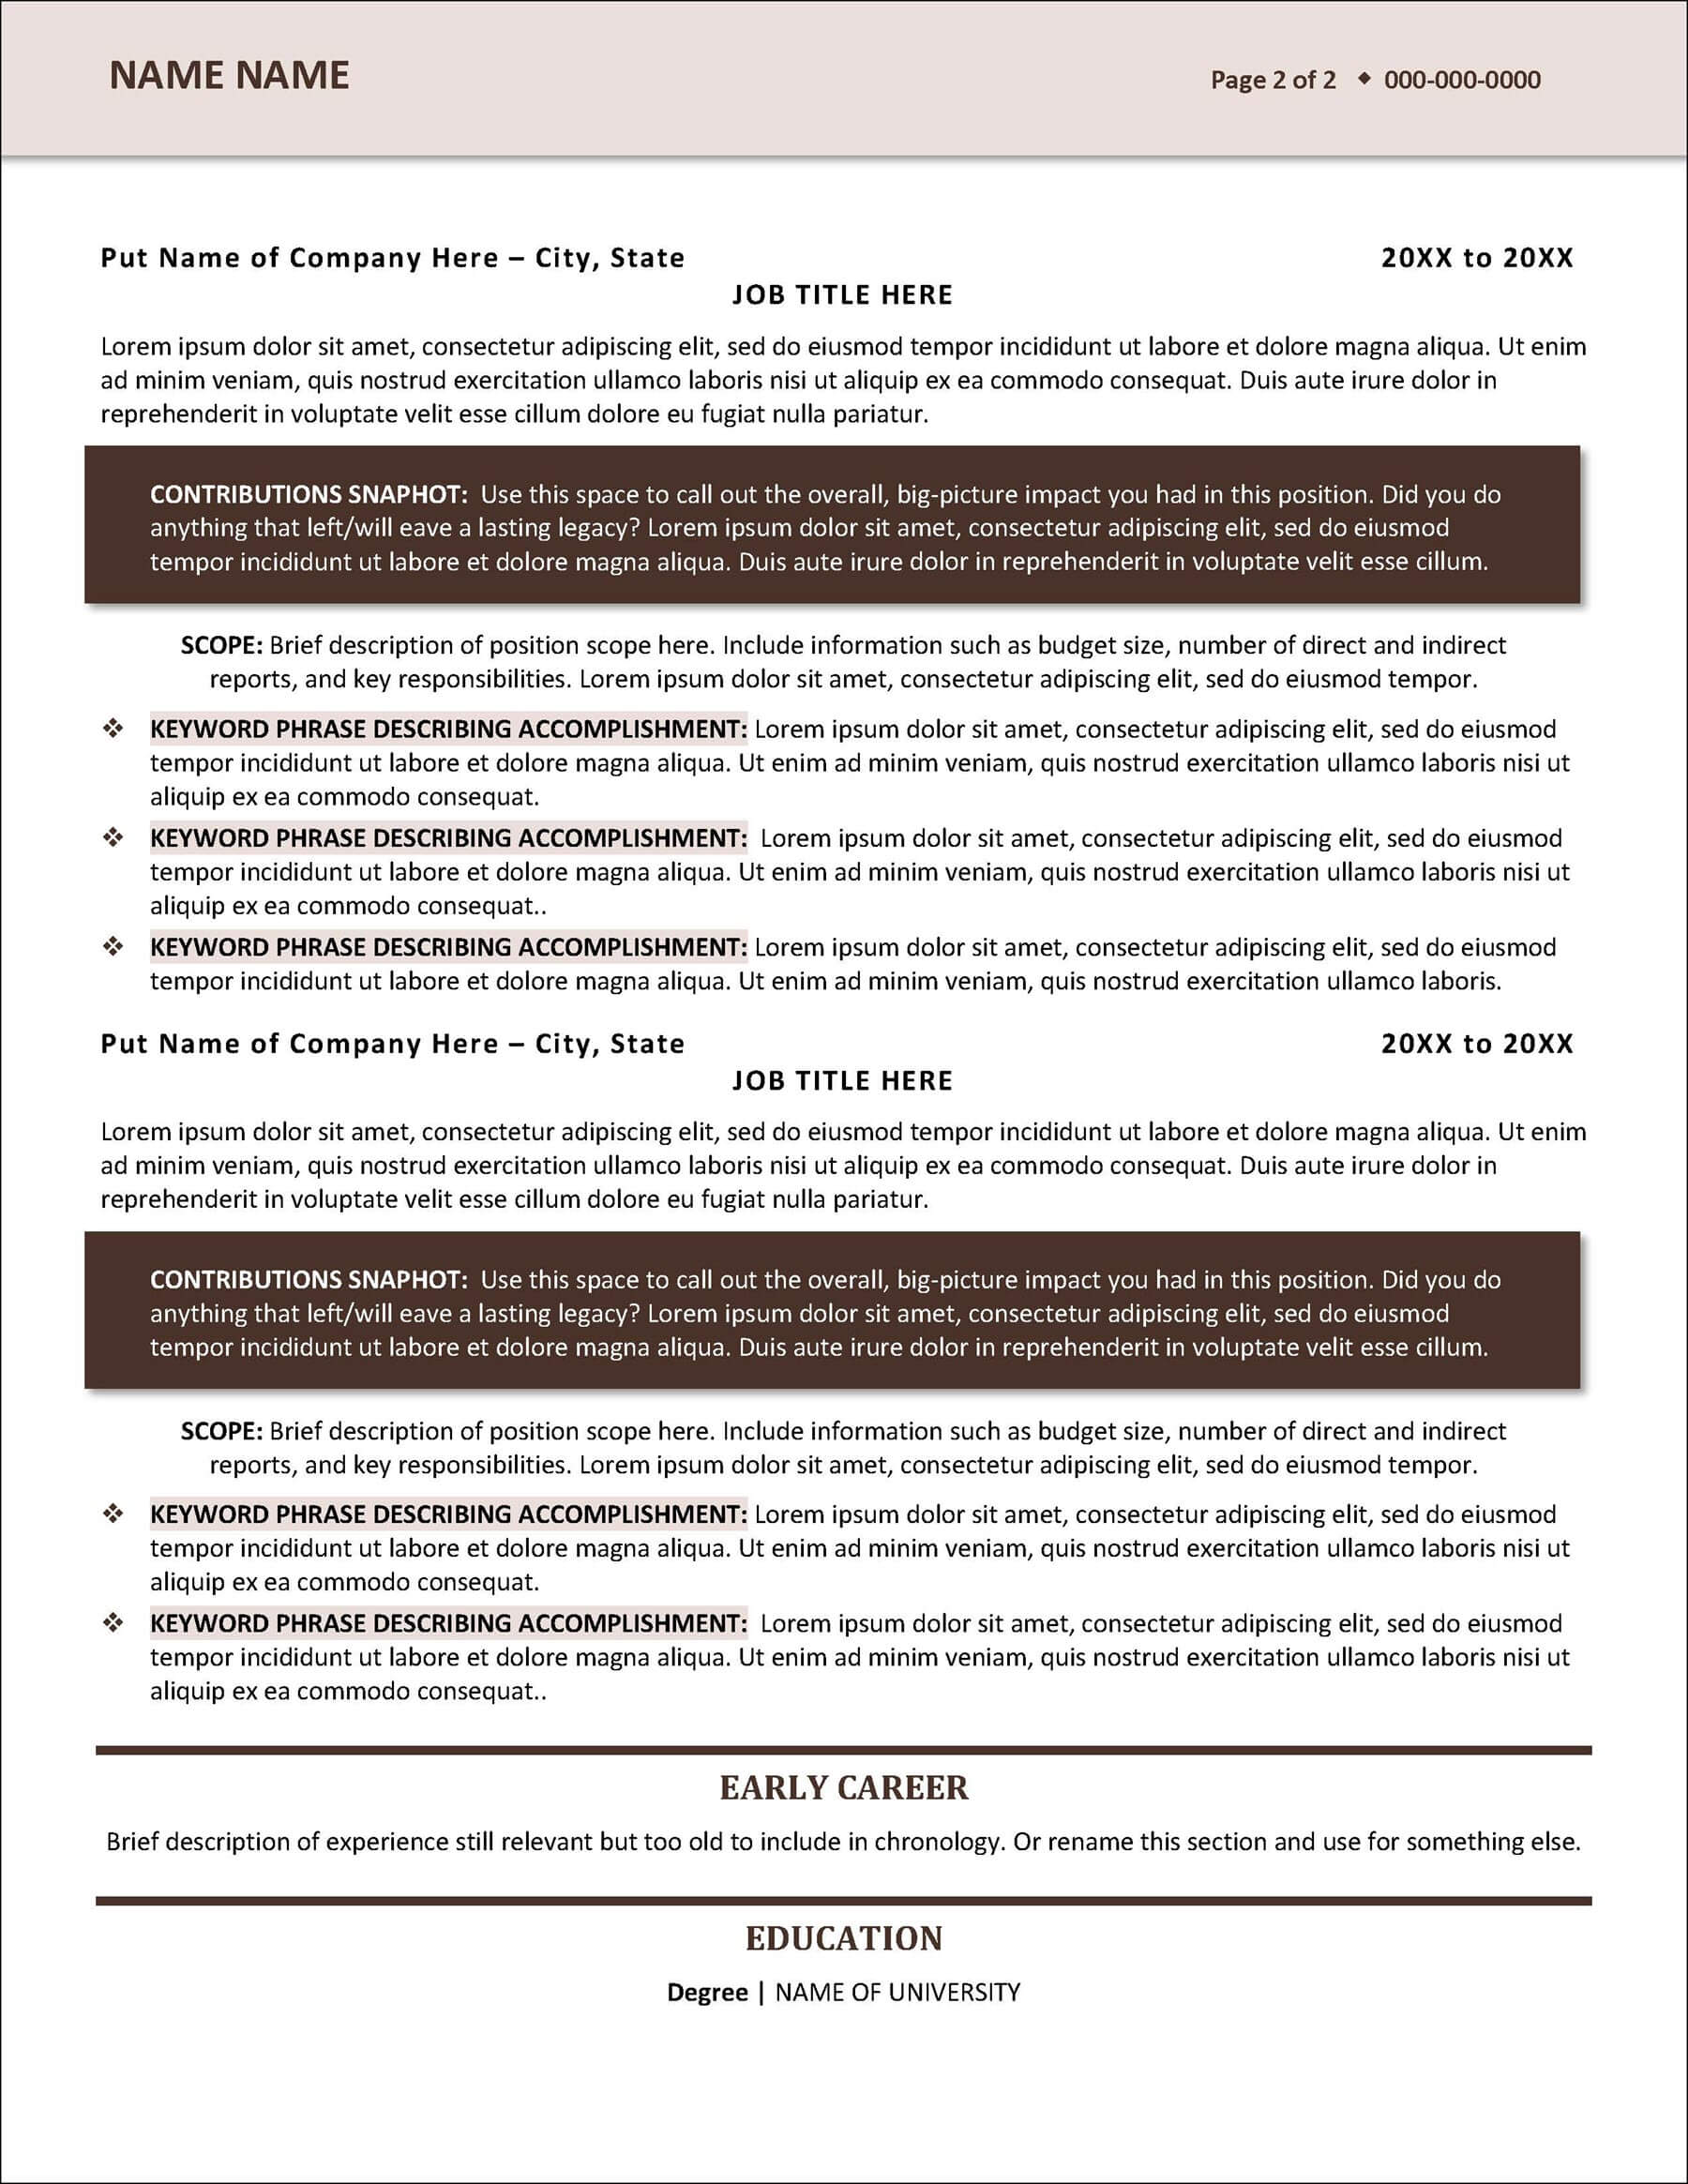 Good Resume Template Page 2